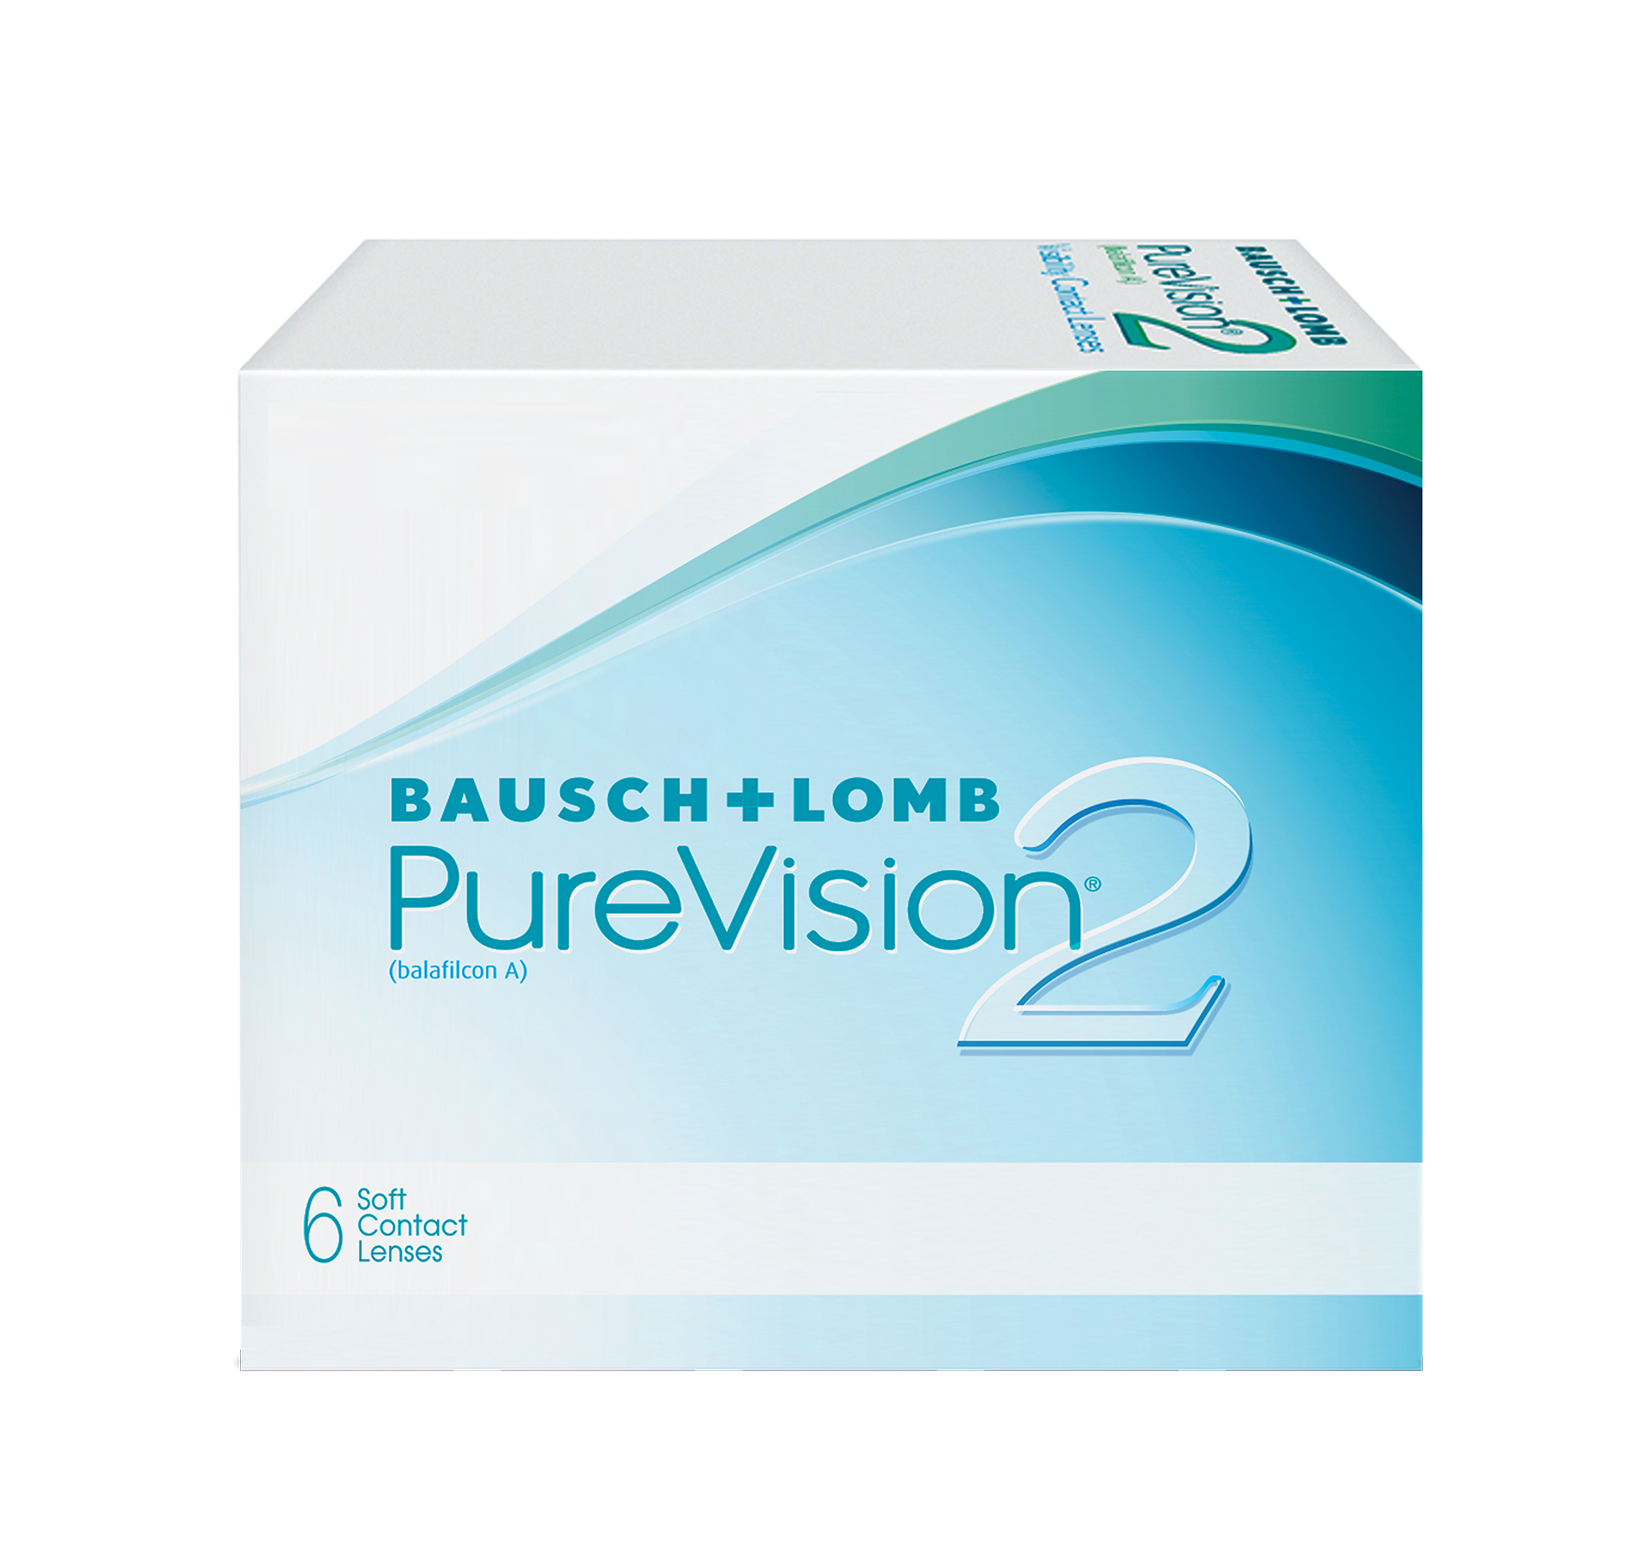 PureVision 2 HD Bausch Lomb